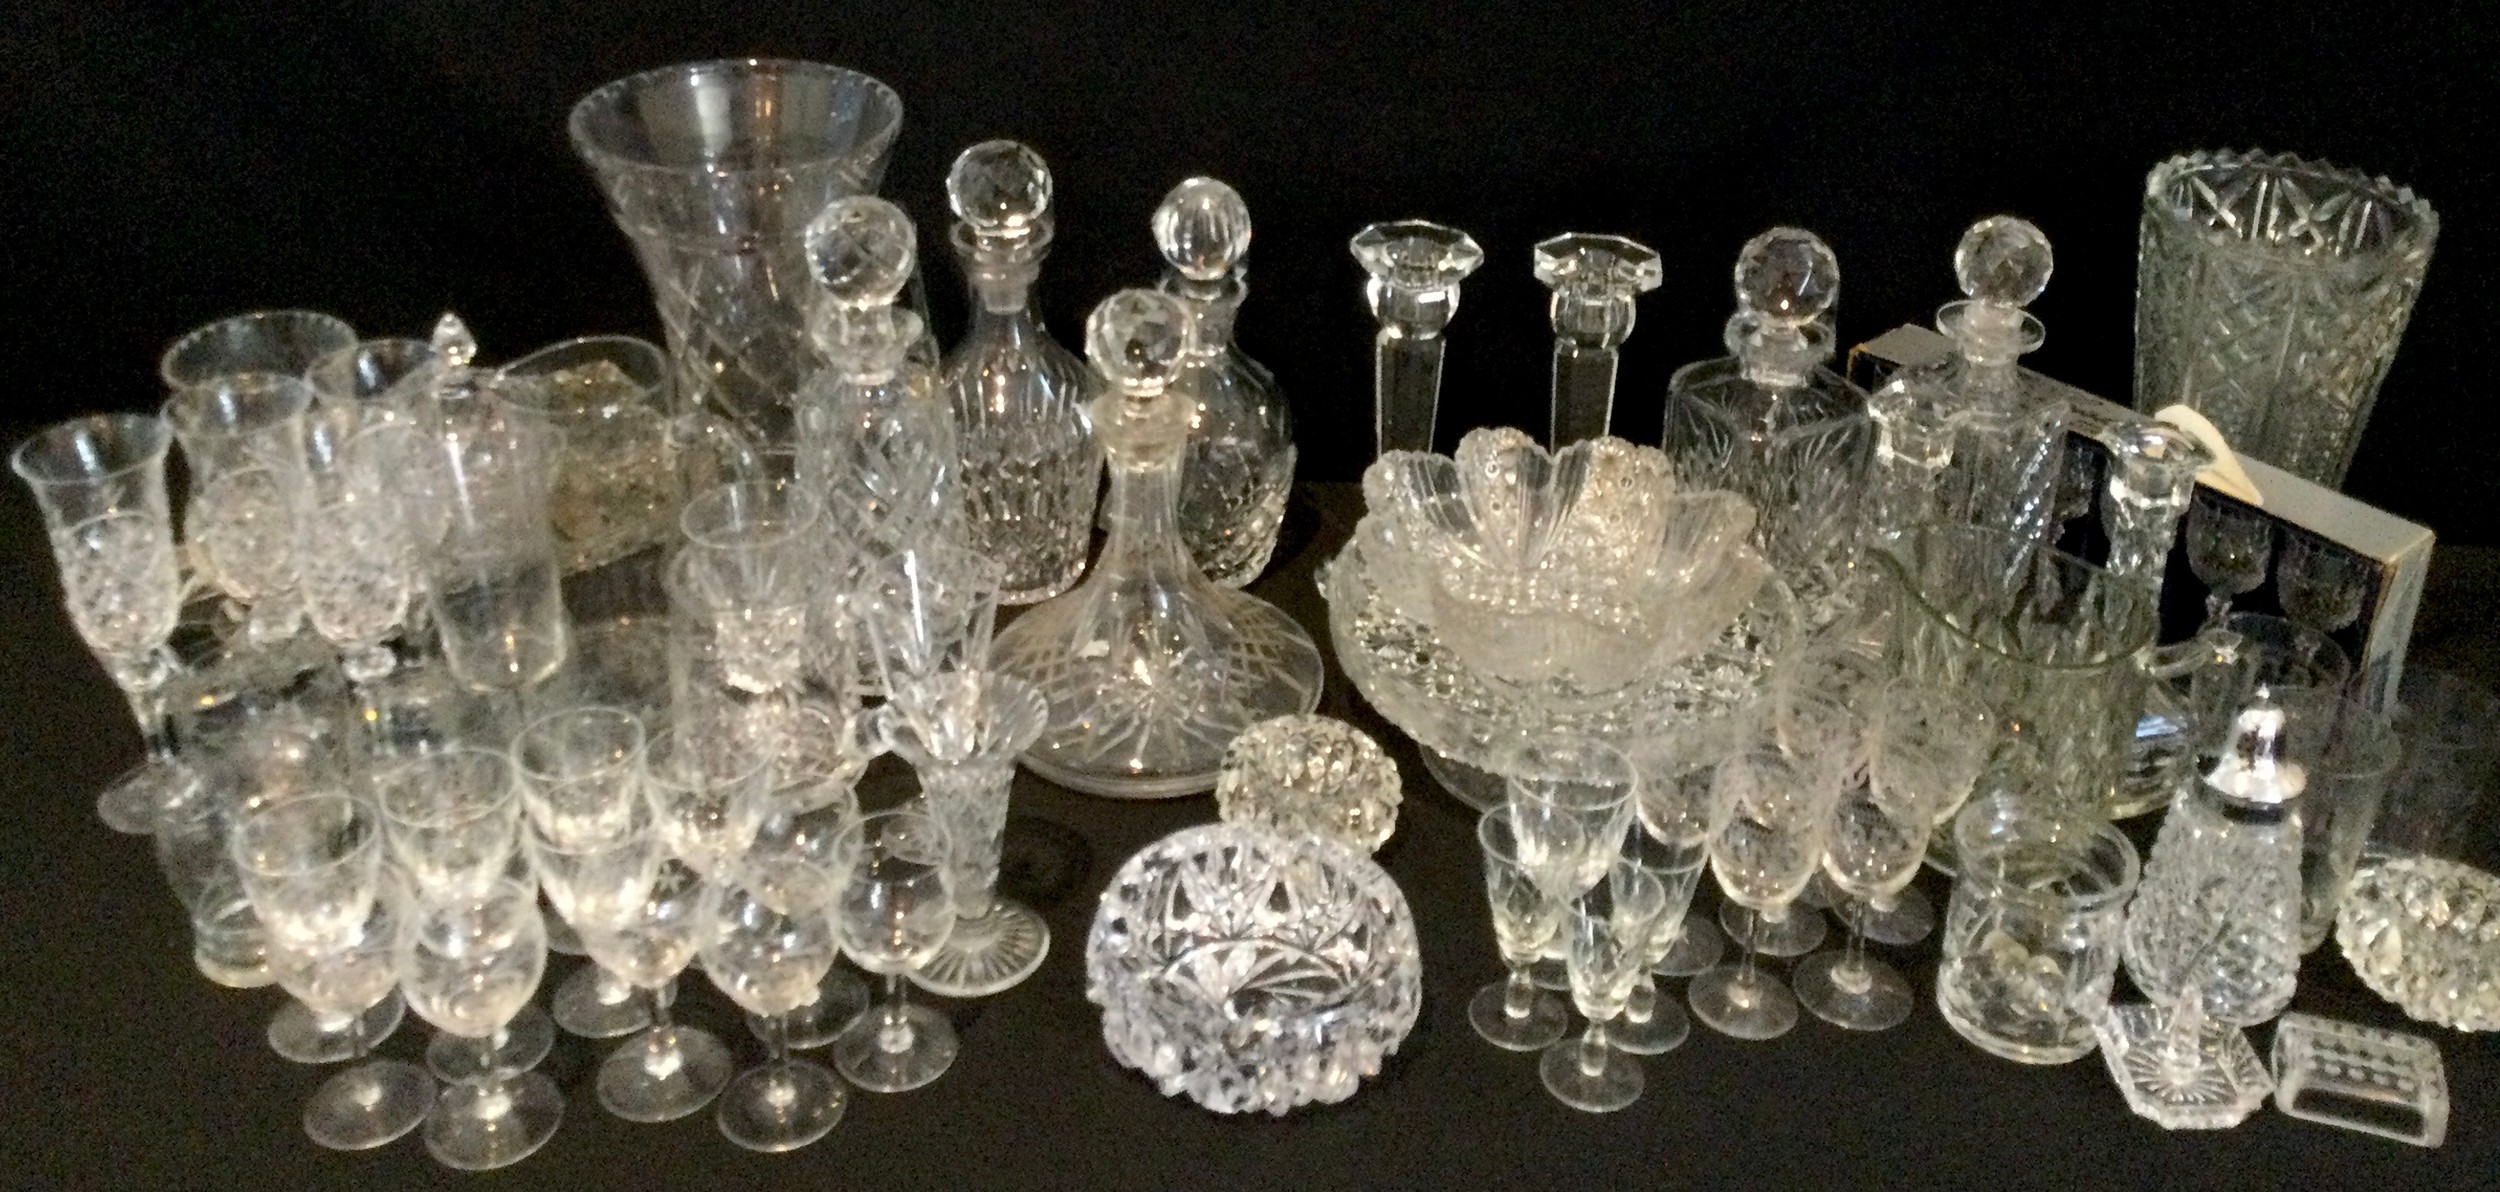 Glass ware - 19th century spirit bottle decanters, pair of faceted candle sticks, set of four cut